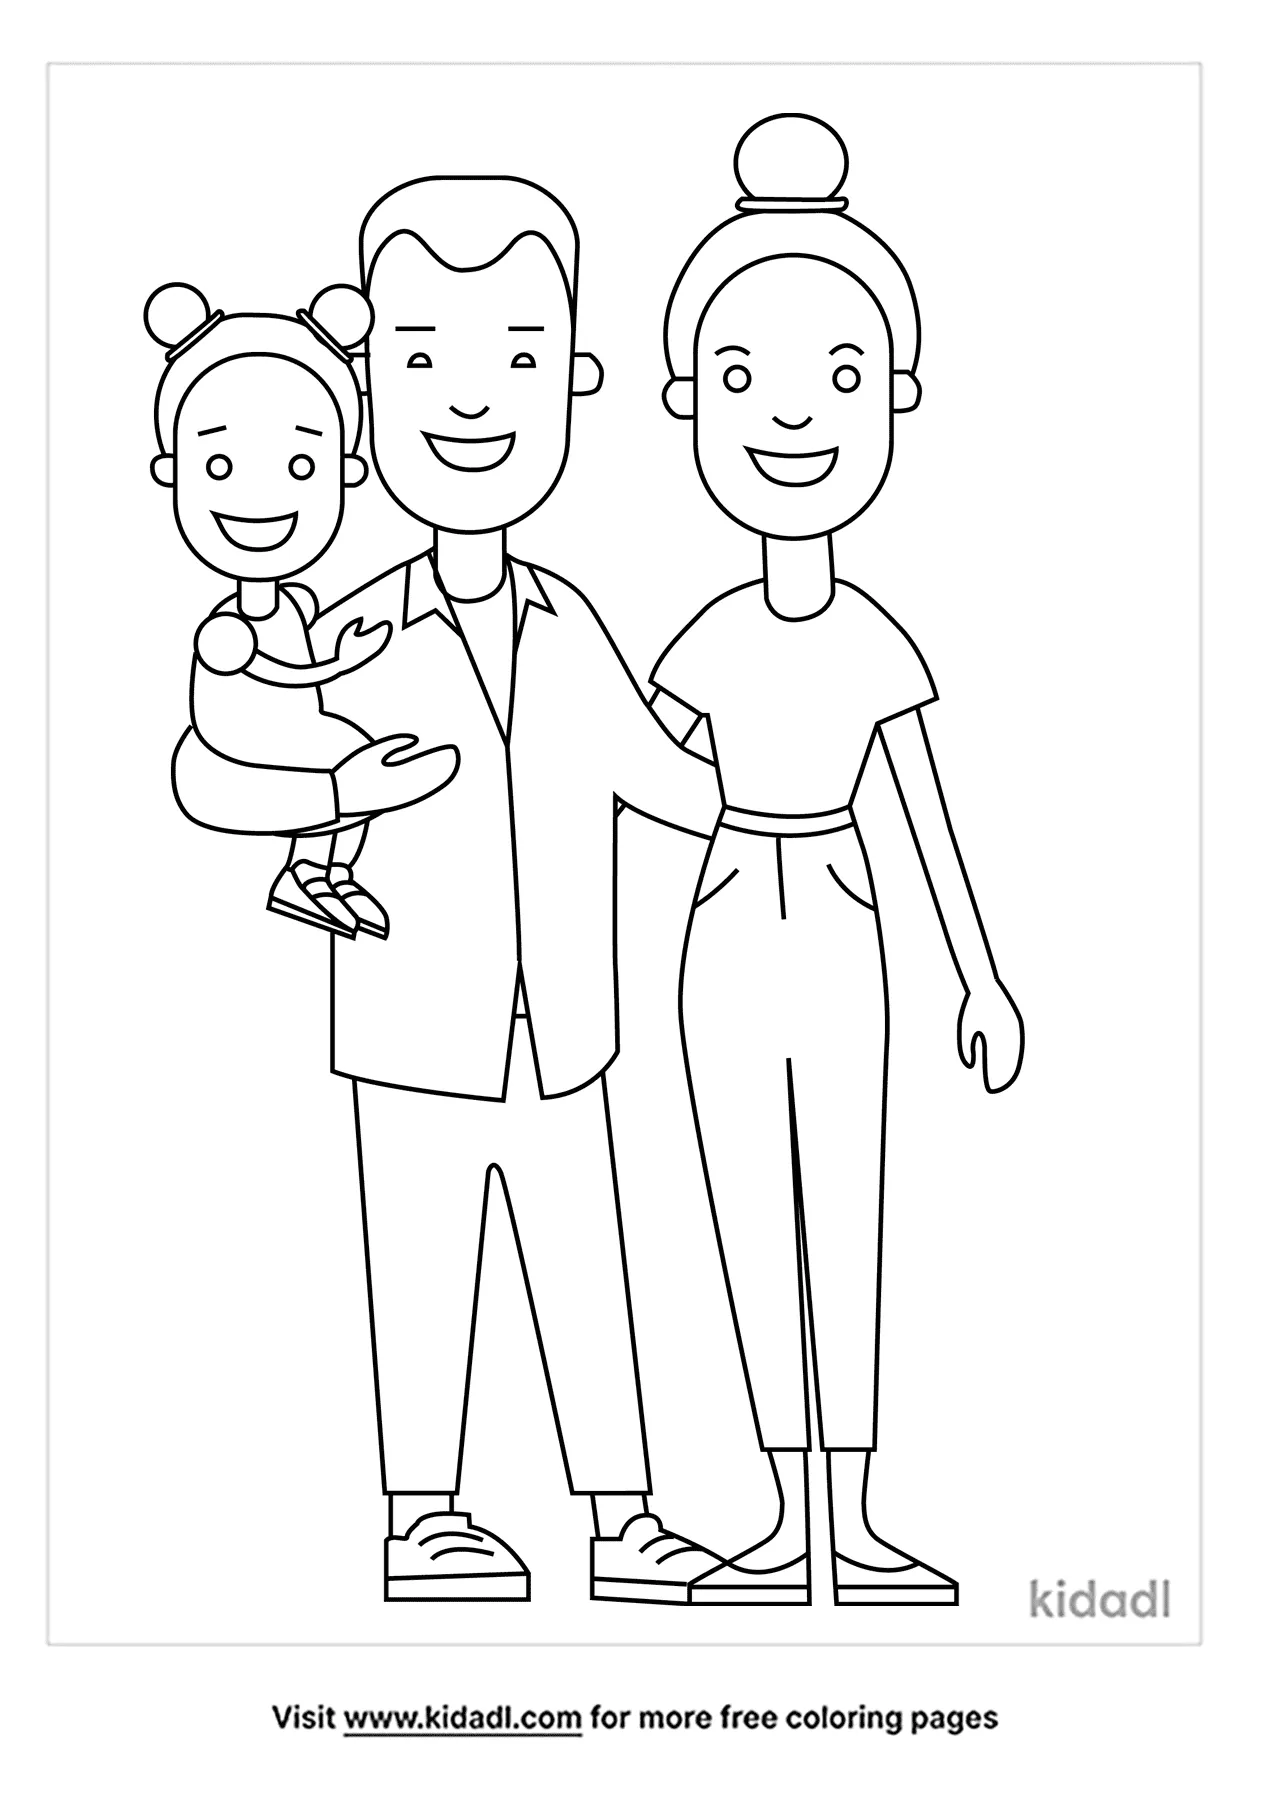 Whole Family Coloring Page